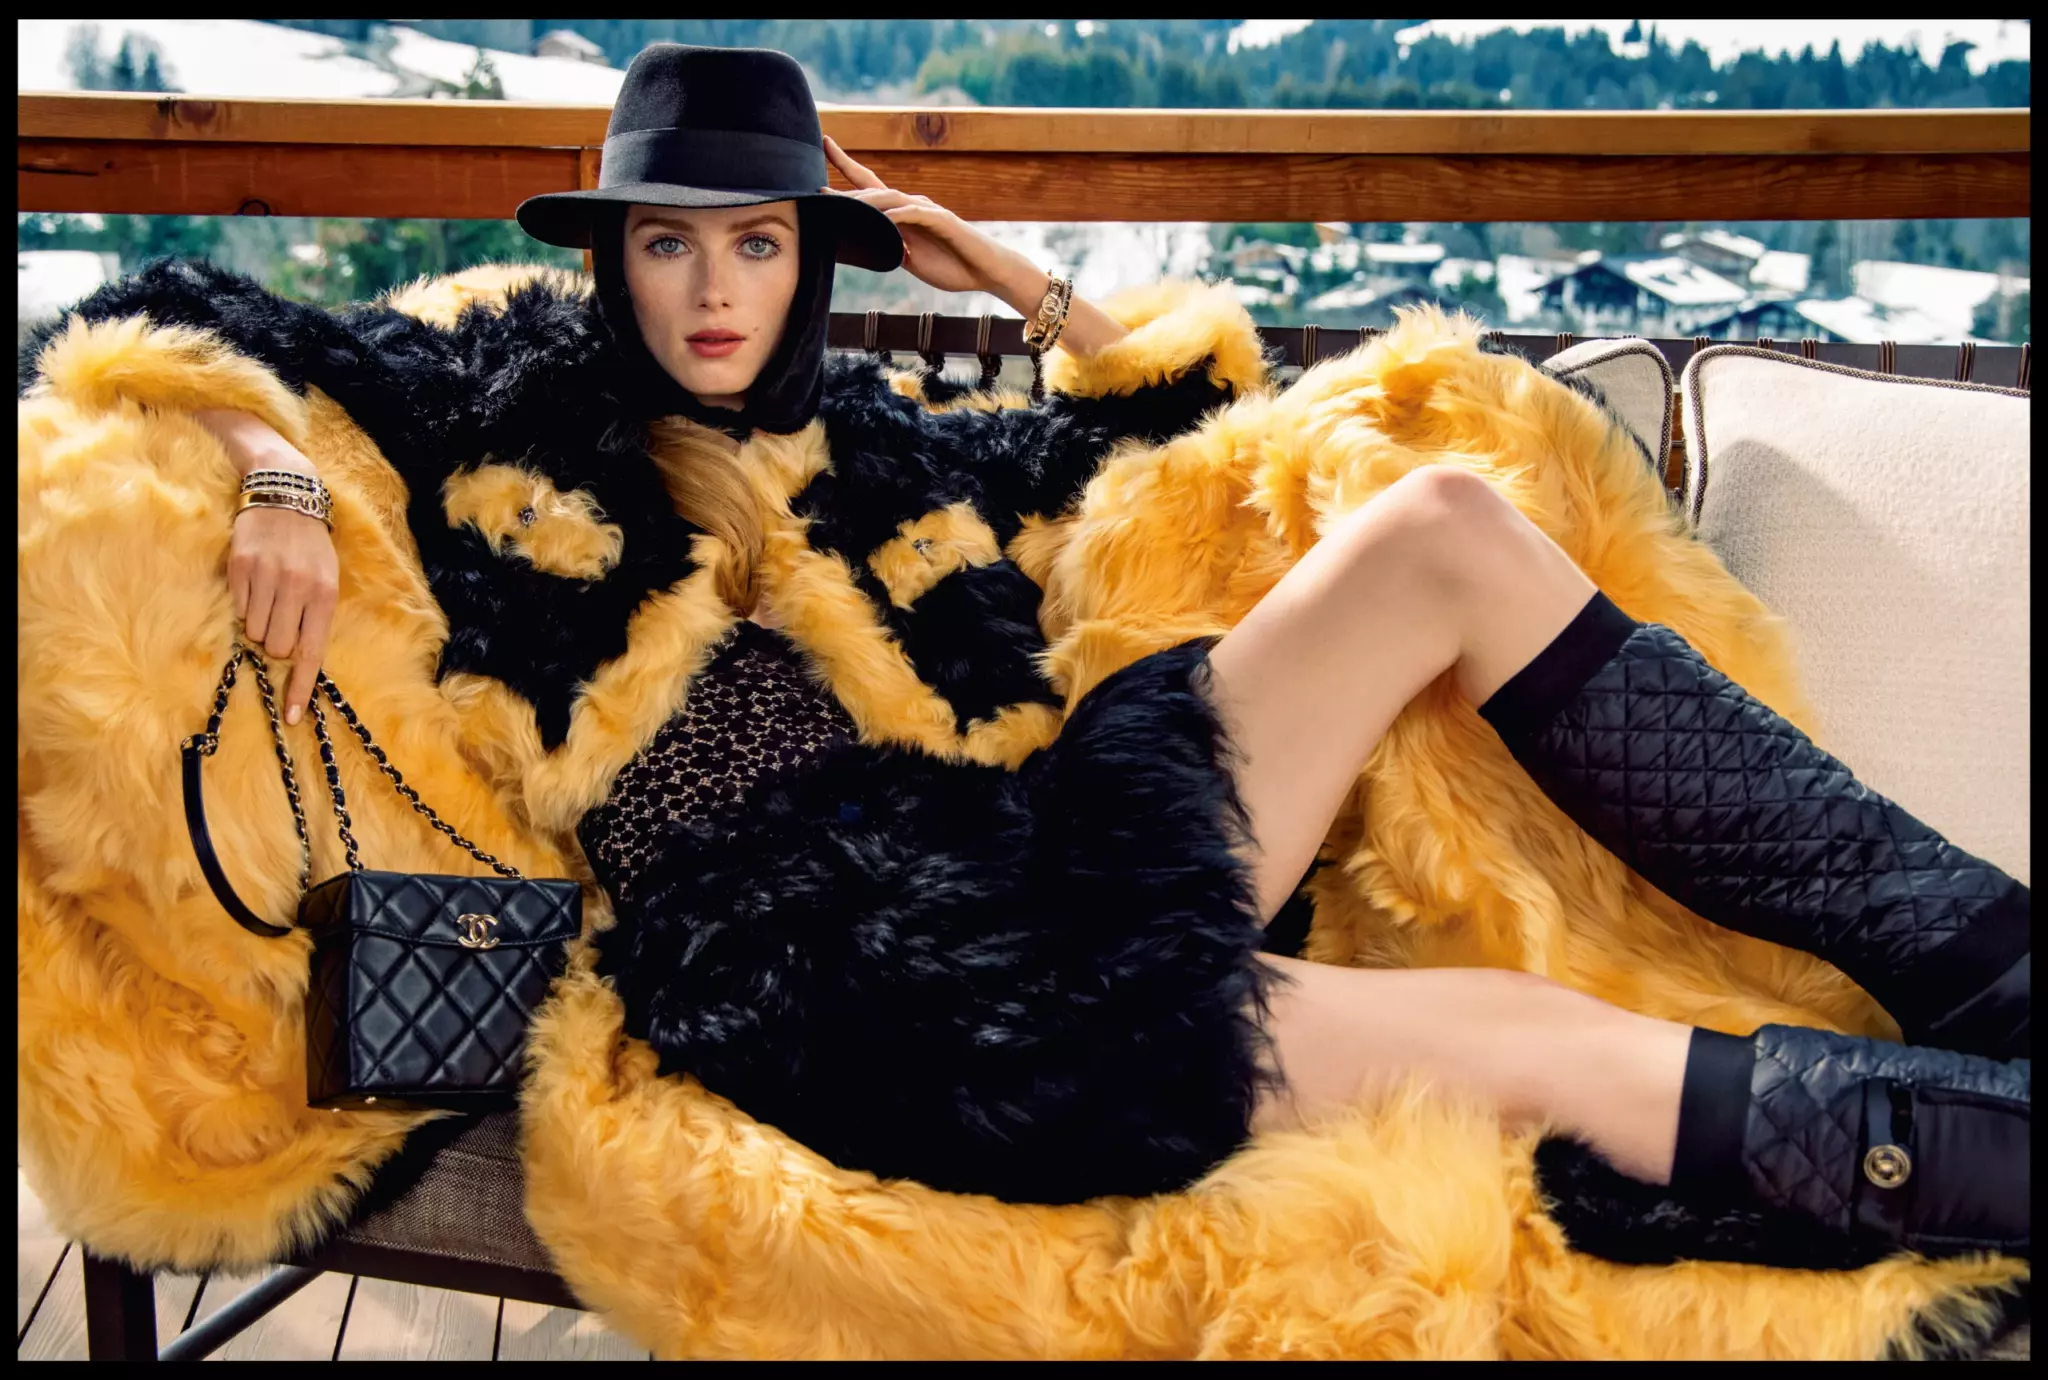 Fall-Winter 21/22 trends that fashionistas will adopt this season. Focus on iconic Chanel, Baum und Pferdgarten, By Malina and By Malene Birger. 5